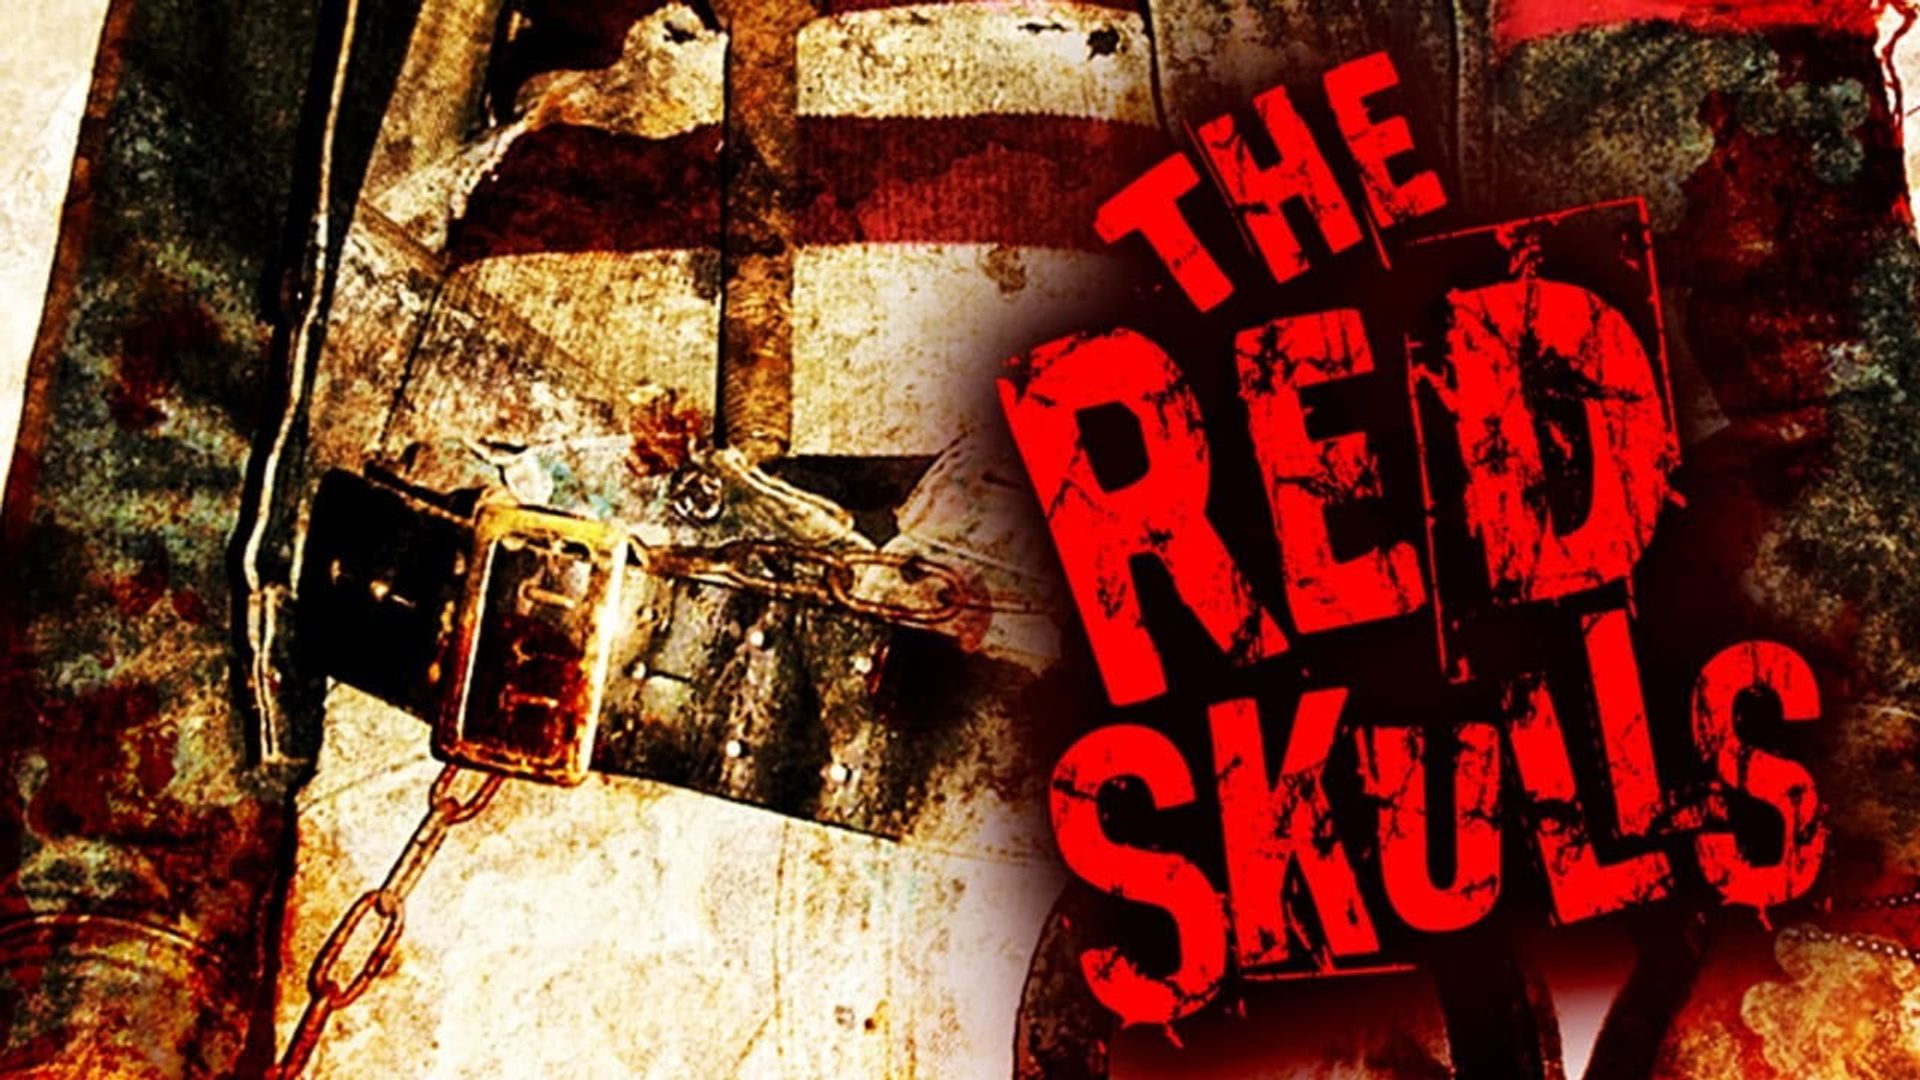 The Red Skulls background